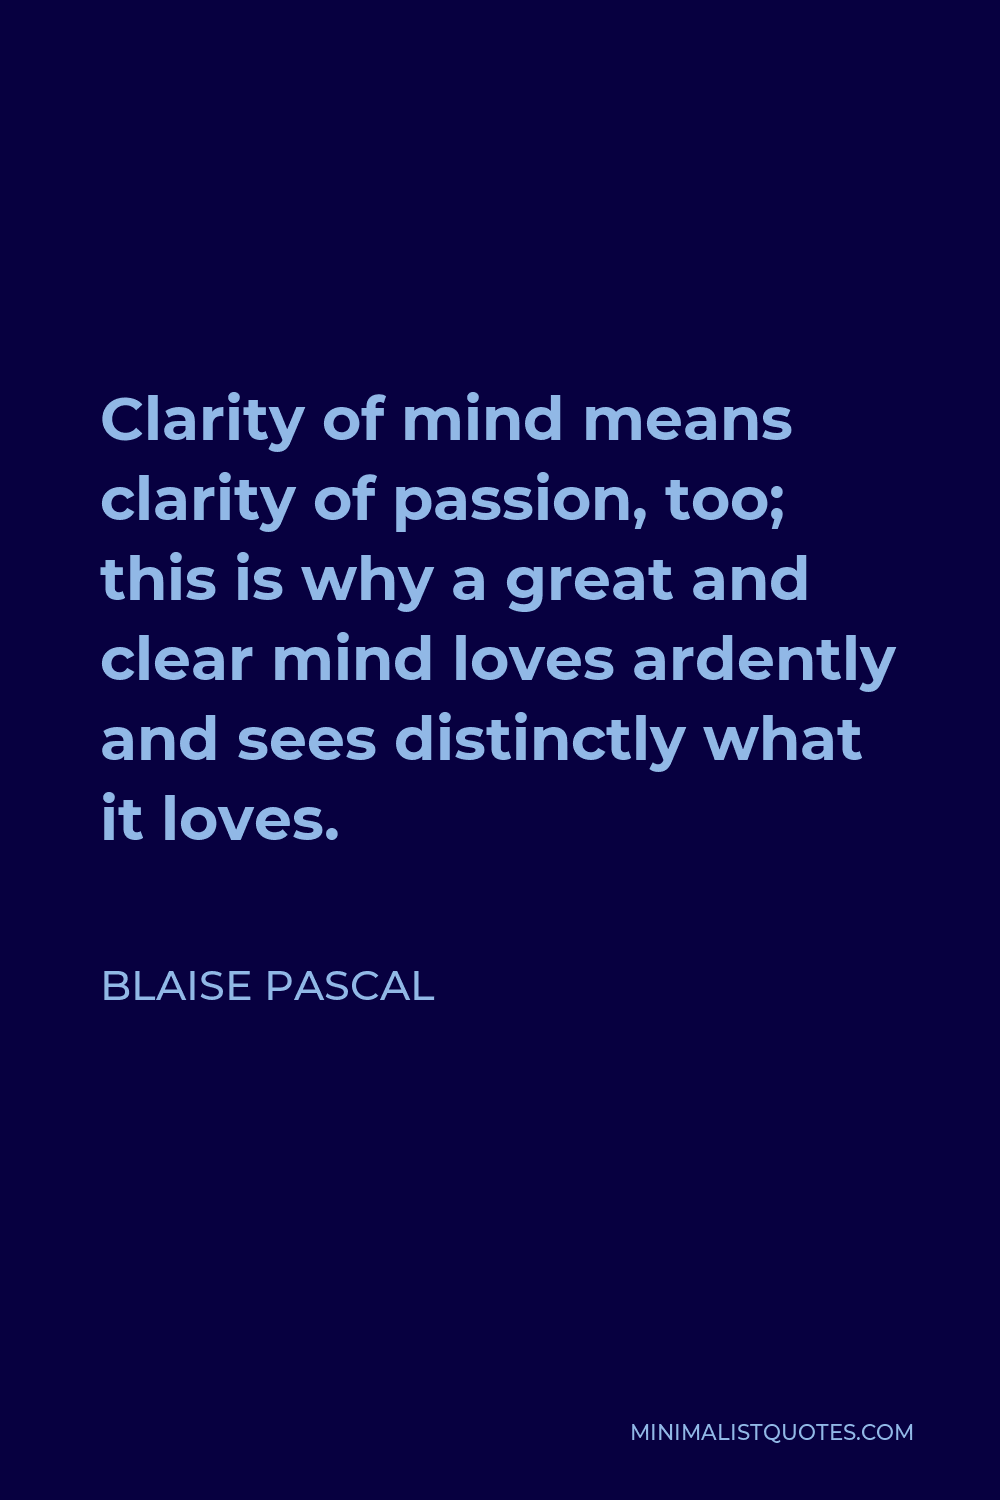 Blaise Pascal Quote - Clarity of mind means clarity of passion, too; this is why a great and clear mind loves ardently and sees distinctly what it loves.